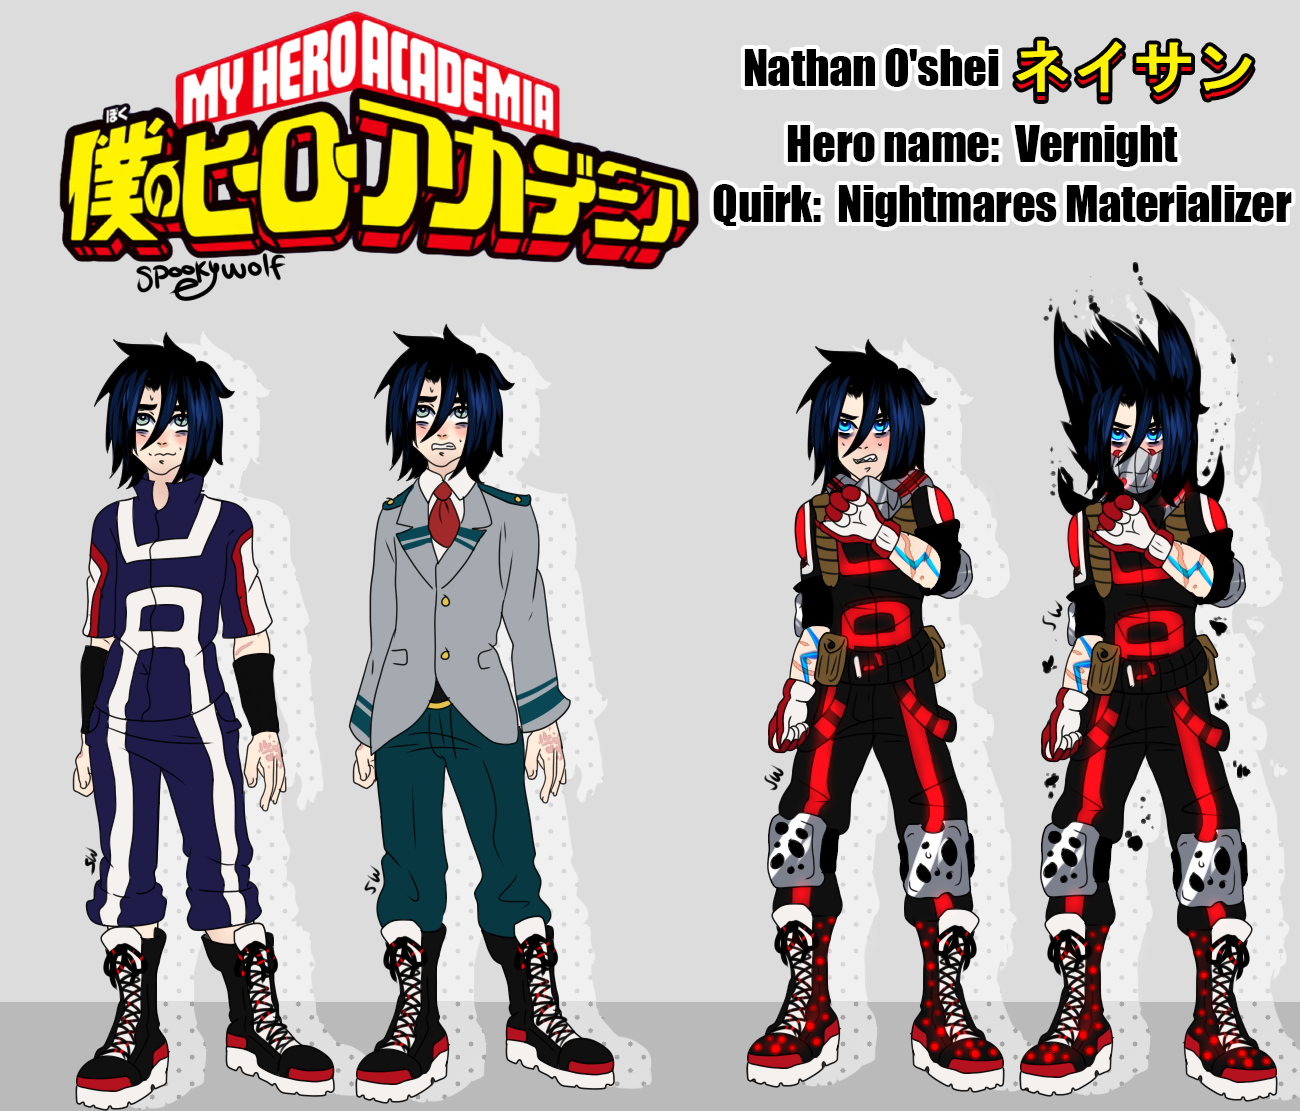 BNHA reference sheet.